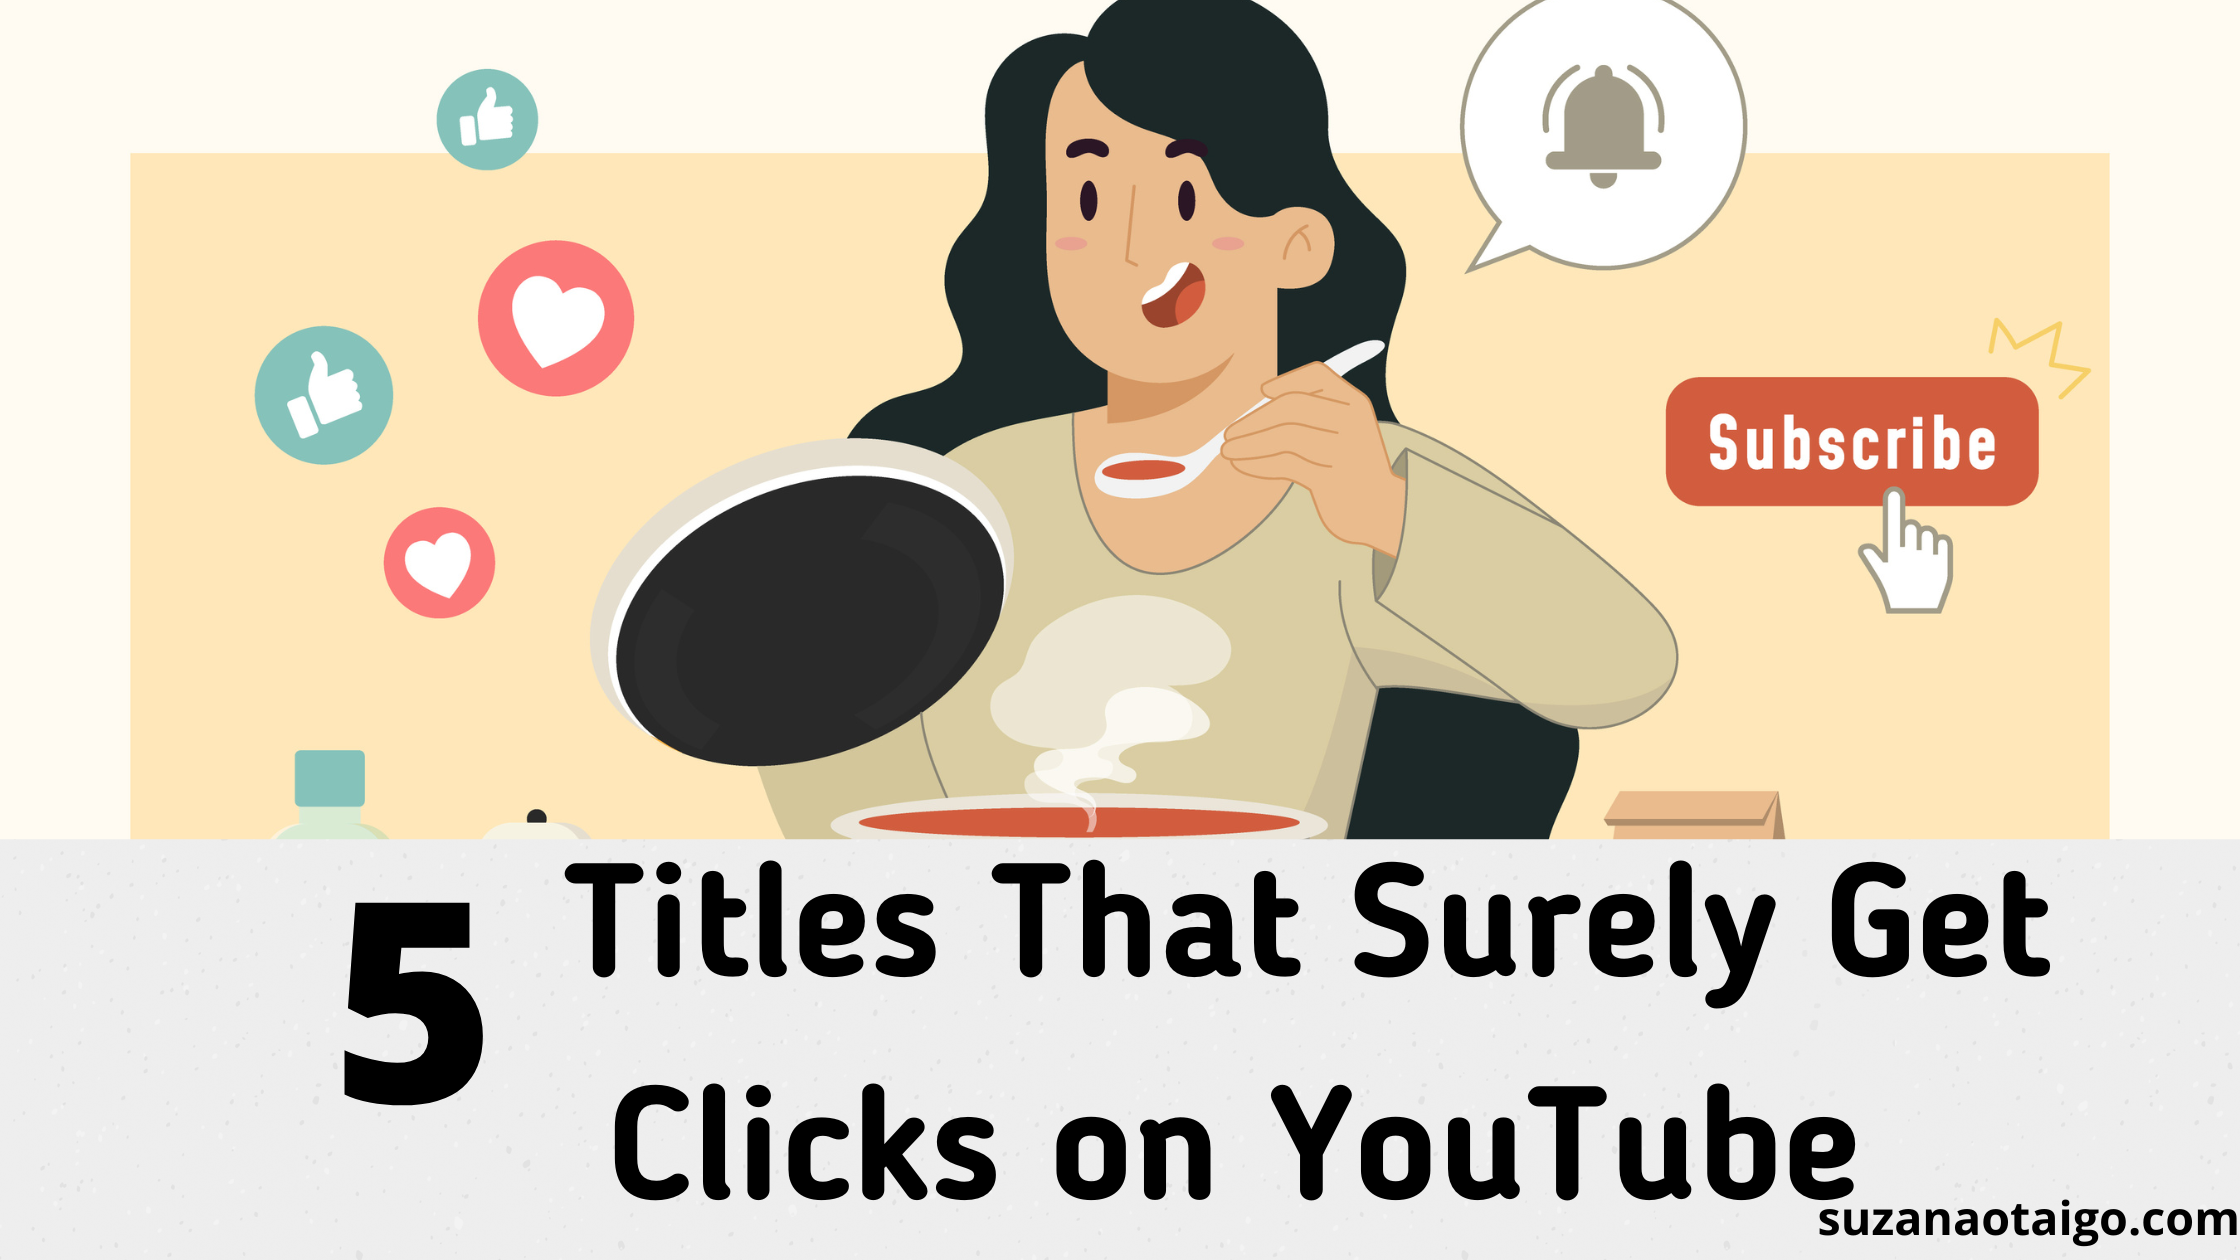 5 Titles That Surely Get Clicks On YouTube